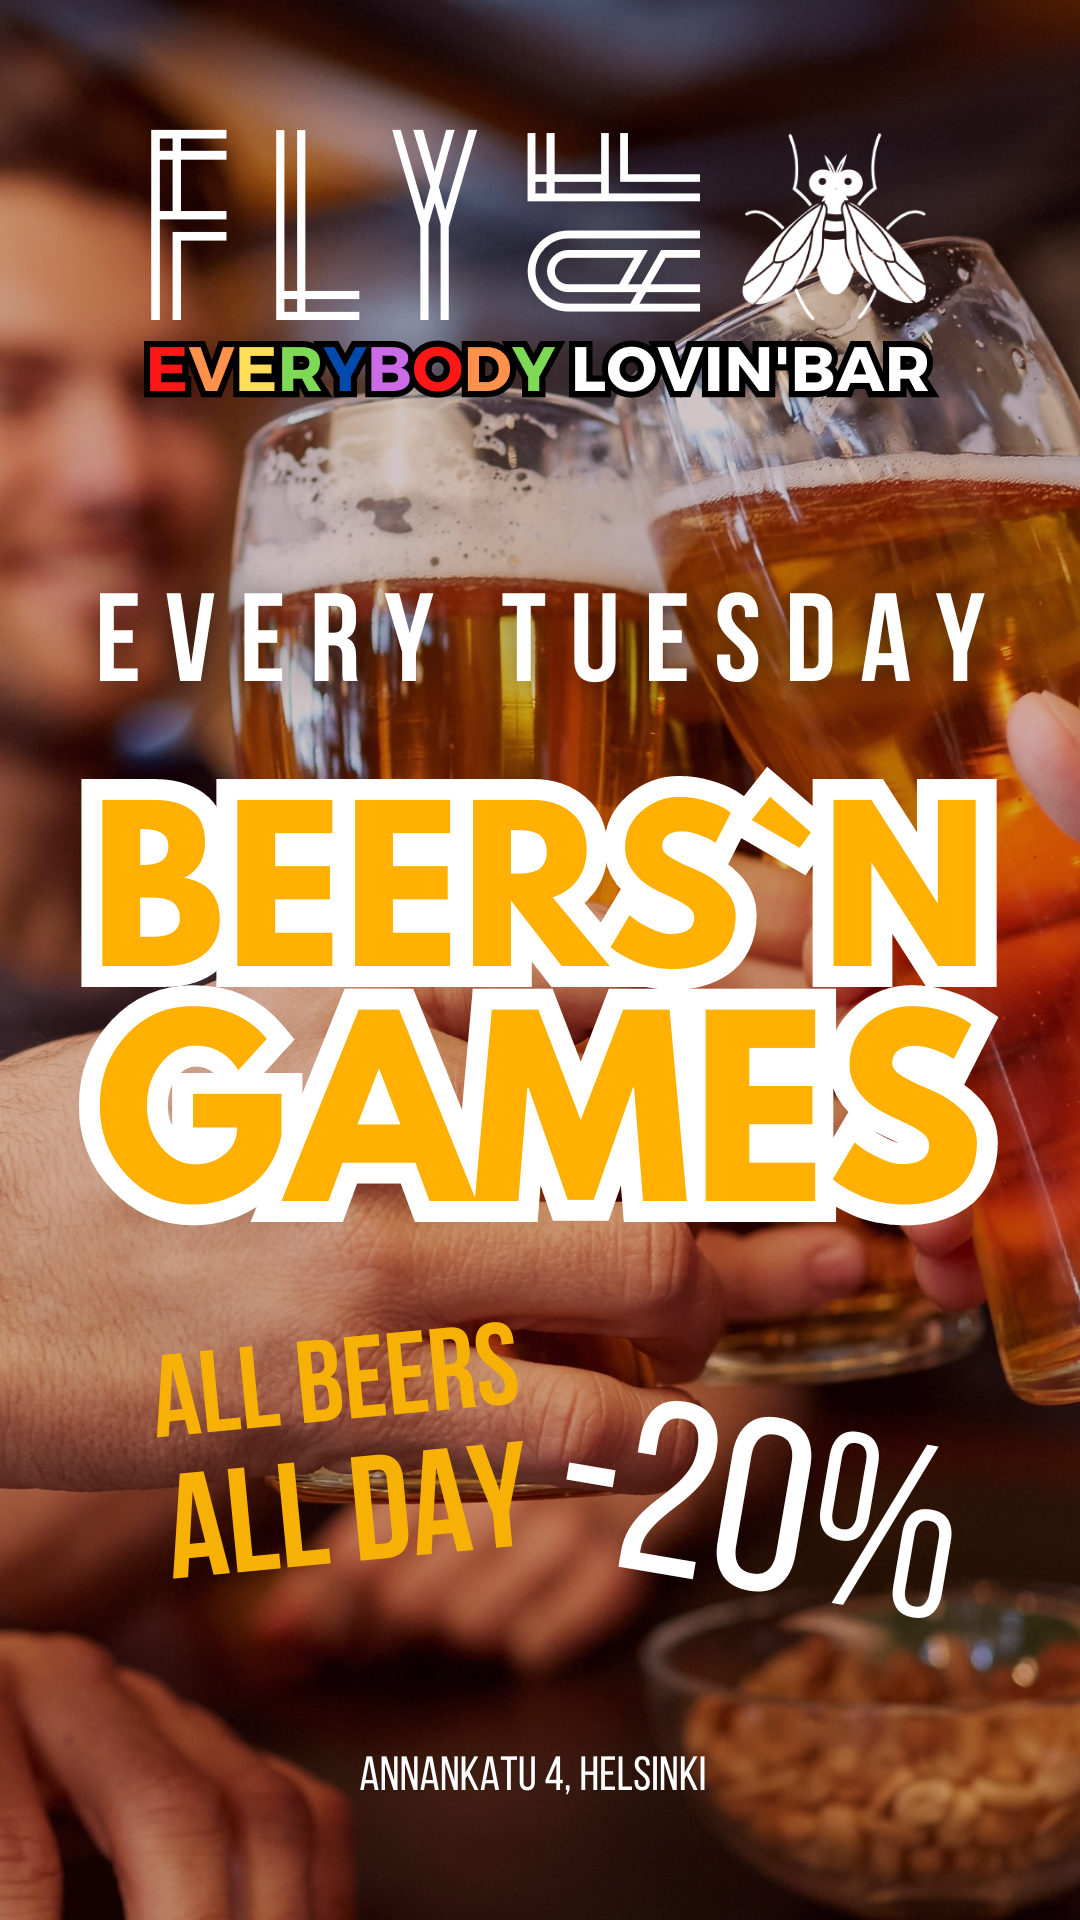 Flyaf bar beer -20% every Tuesday with game night